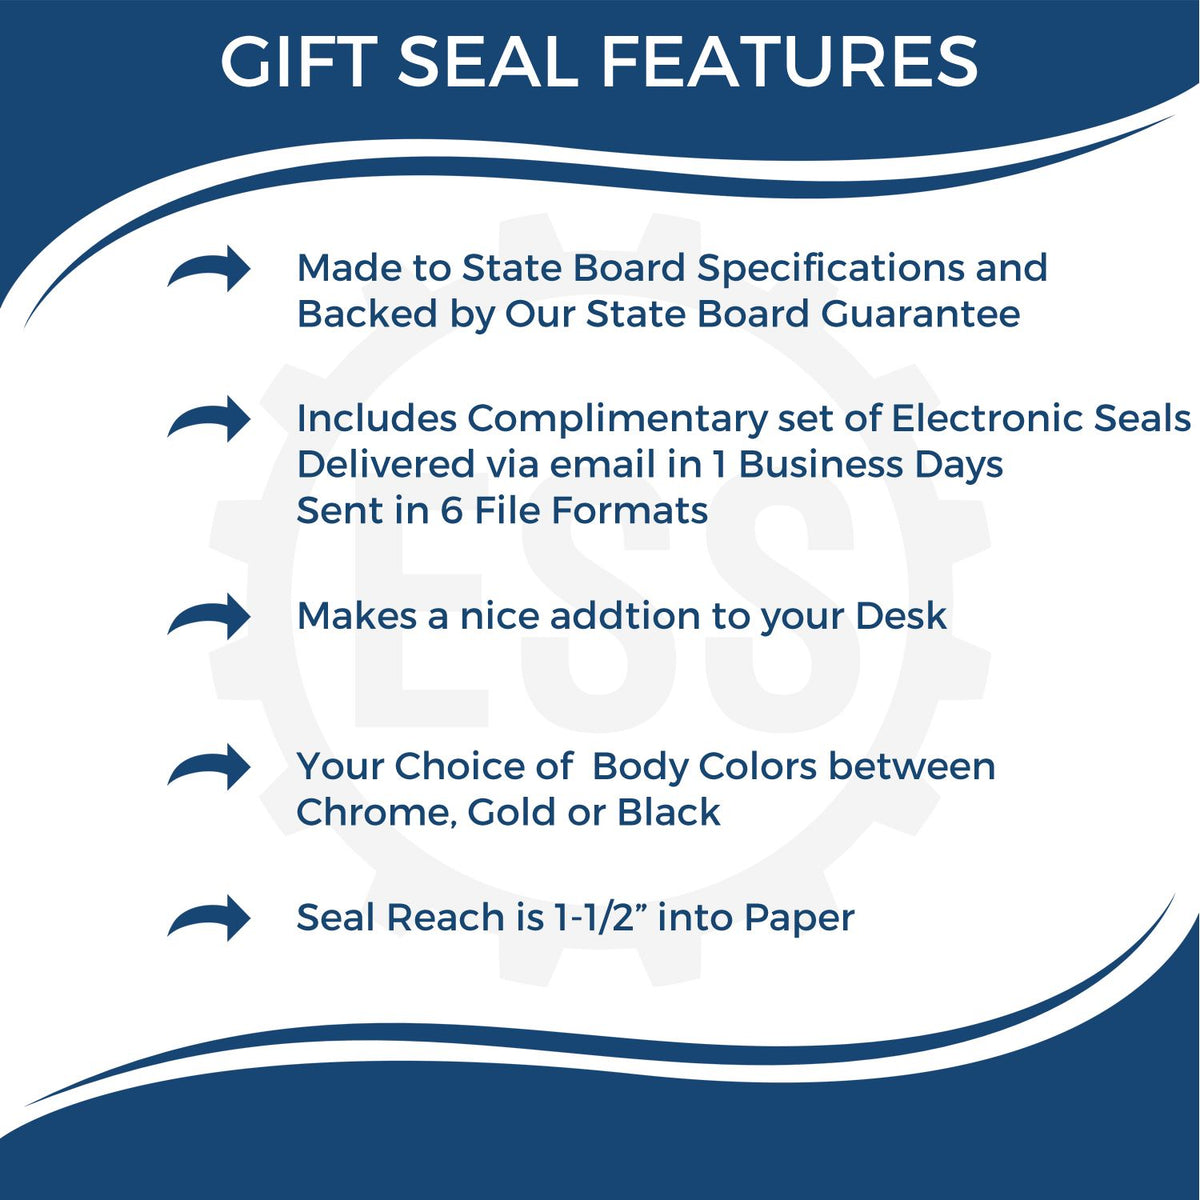 A picture of an infographic highlighting the selling points for the Gift Hawaii Engineer Seal